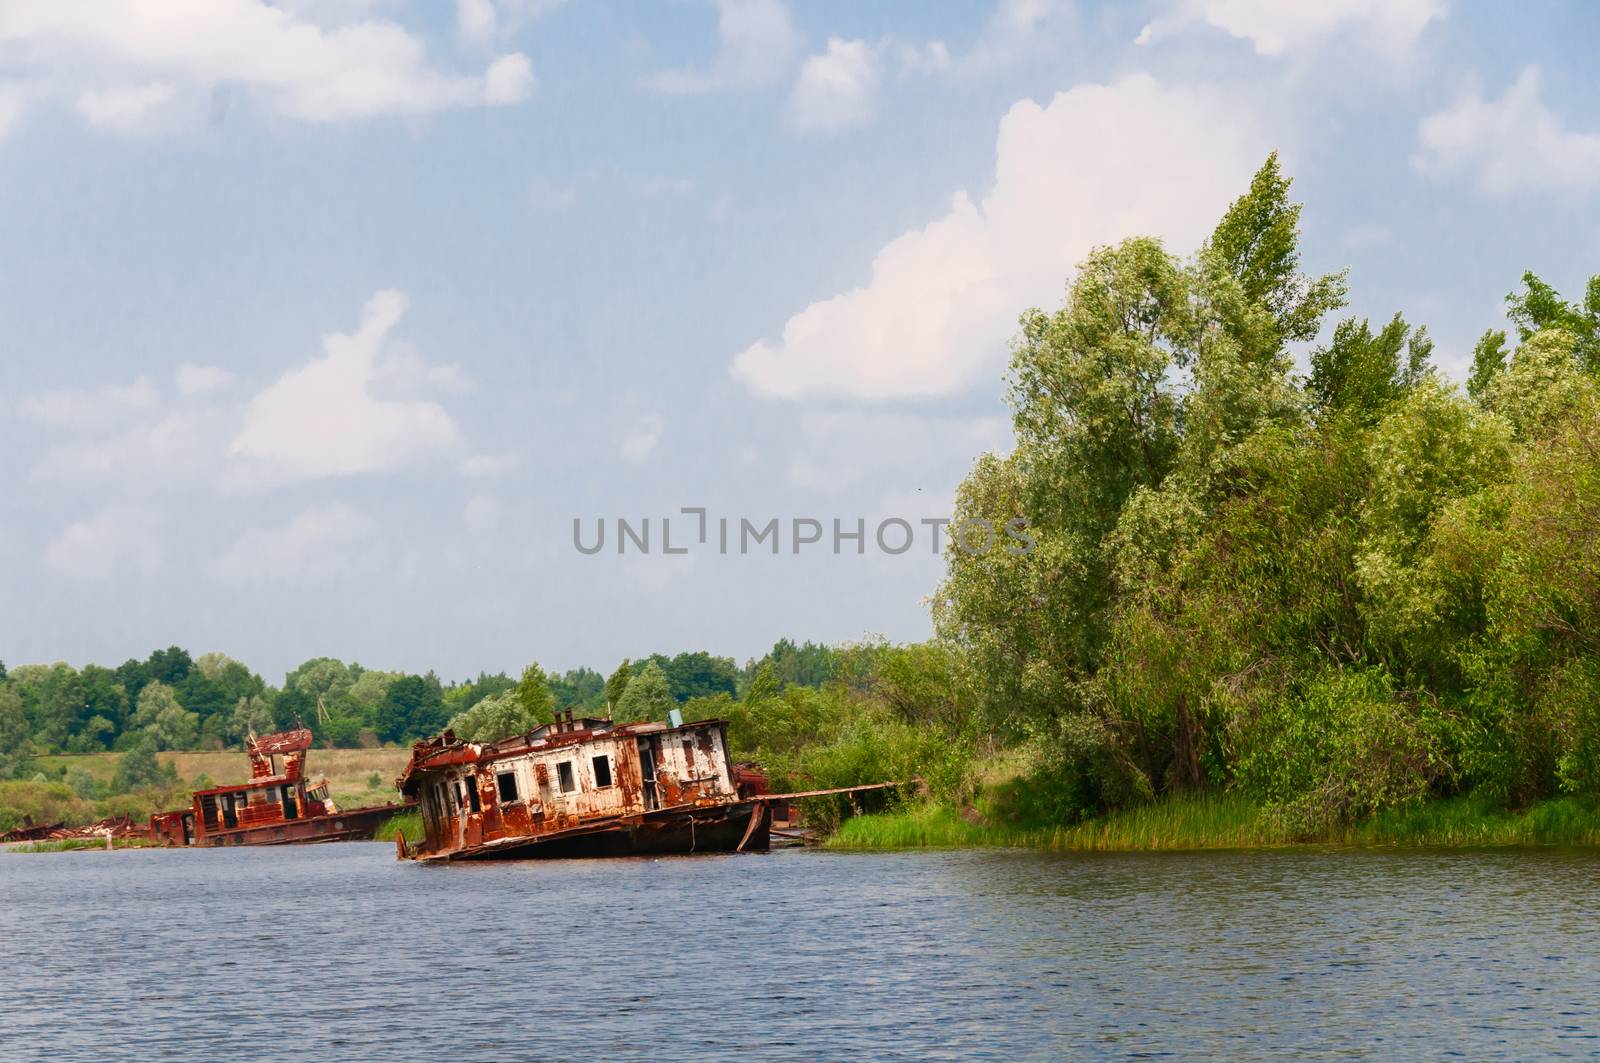 Wrecked abandoned ships on a river after nuclear disaster in Chernobyl, Ukraine